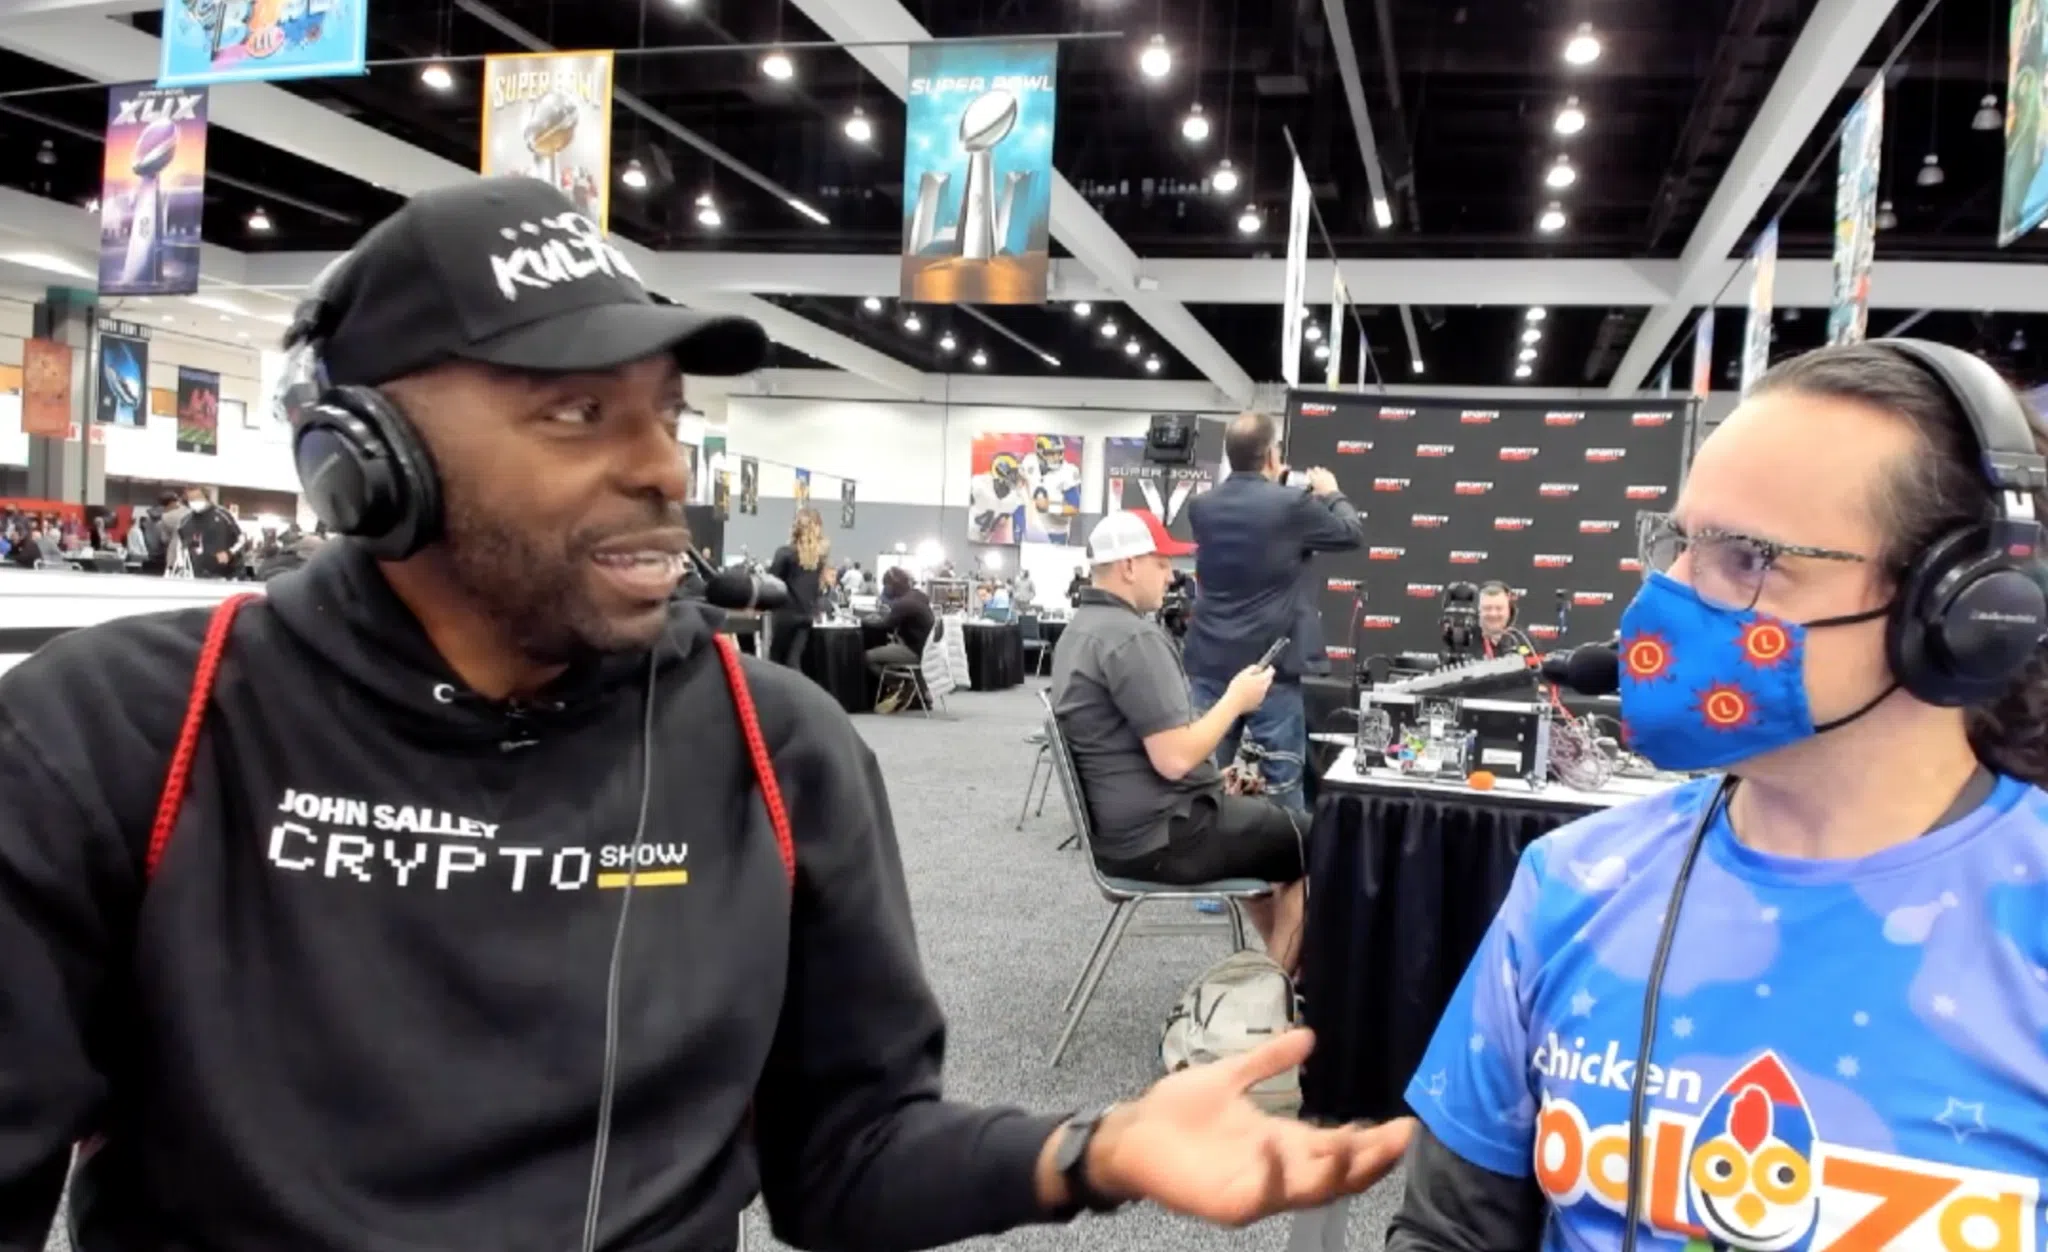 Going down the alley of cannabis and vegan life with John Salley